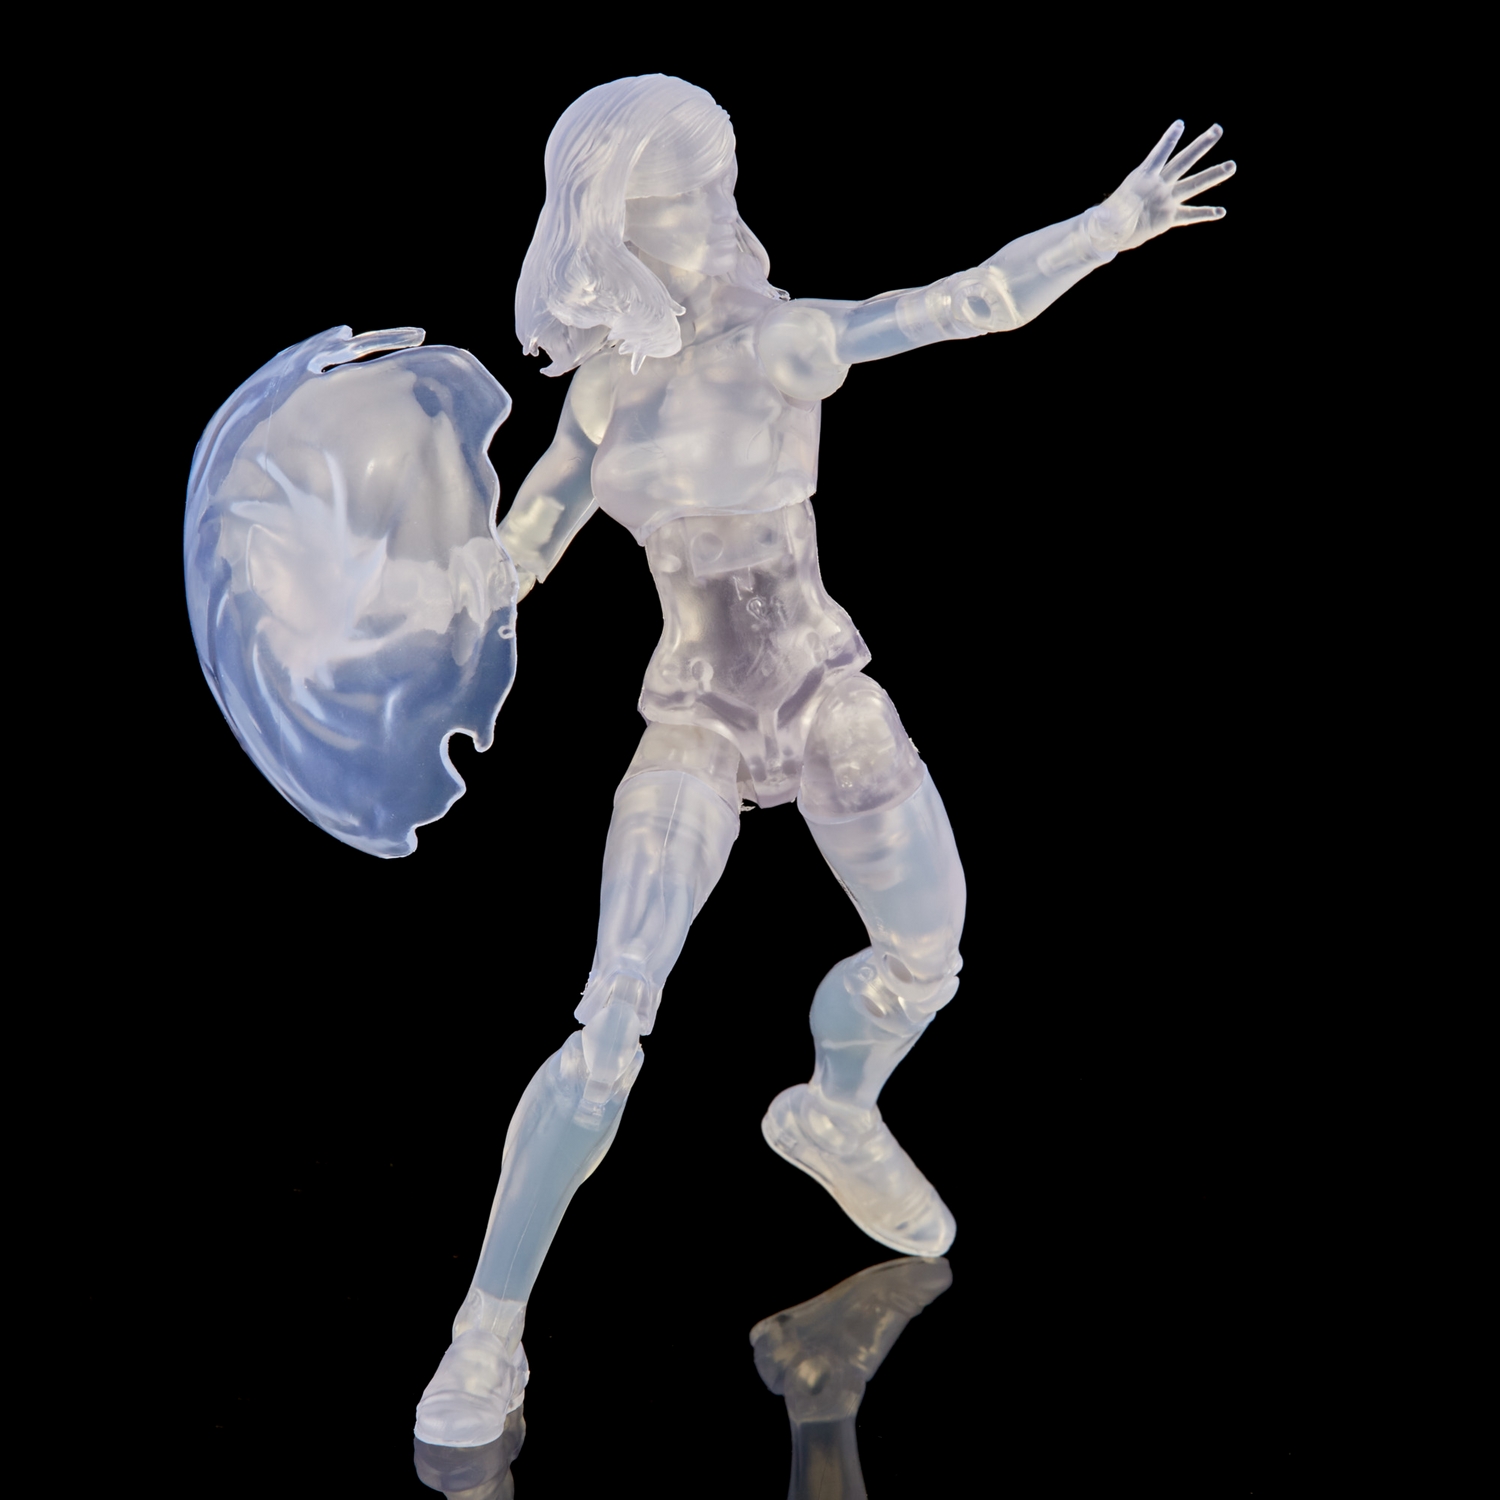 MARVEL LEGENDS SERIES 6-INCH RETRO FANTASTIC FOUR MARVEL’S INVISIBLE WOMAN Figure (Clear)_oop 8.jpg